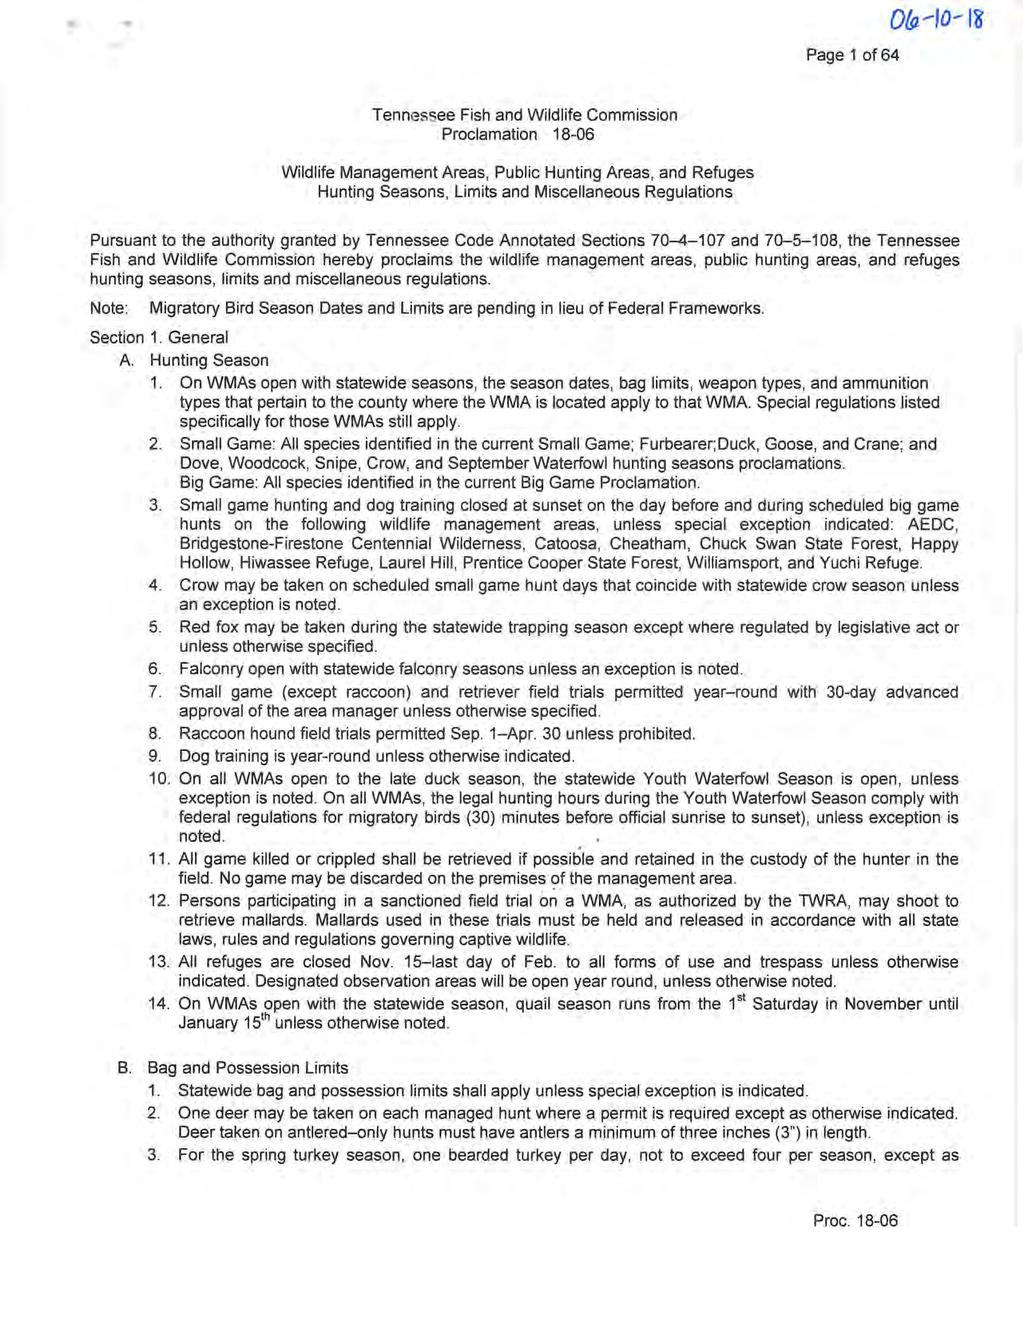 ,,.. Page 1 of 64 Ofp--10--- nr Tennessee Fish and Wildlife Commission Proclamation 18-06 Wildlife Management Areas, Public Hunting Areas, and Refuges Hunting Seasons, Limits and Miscellaneous